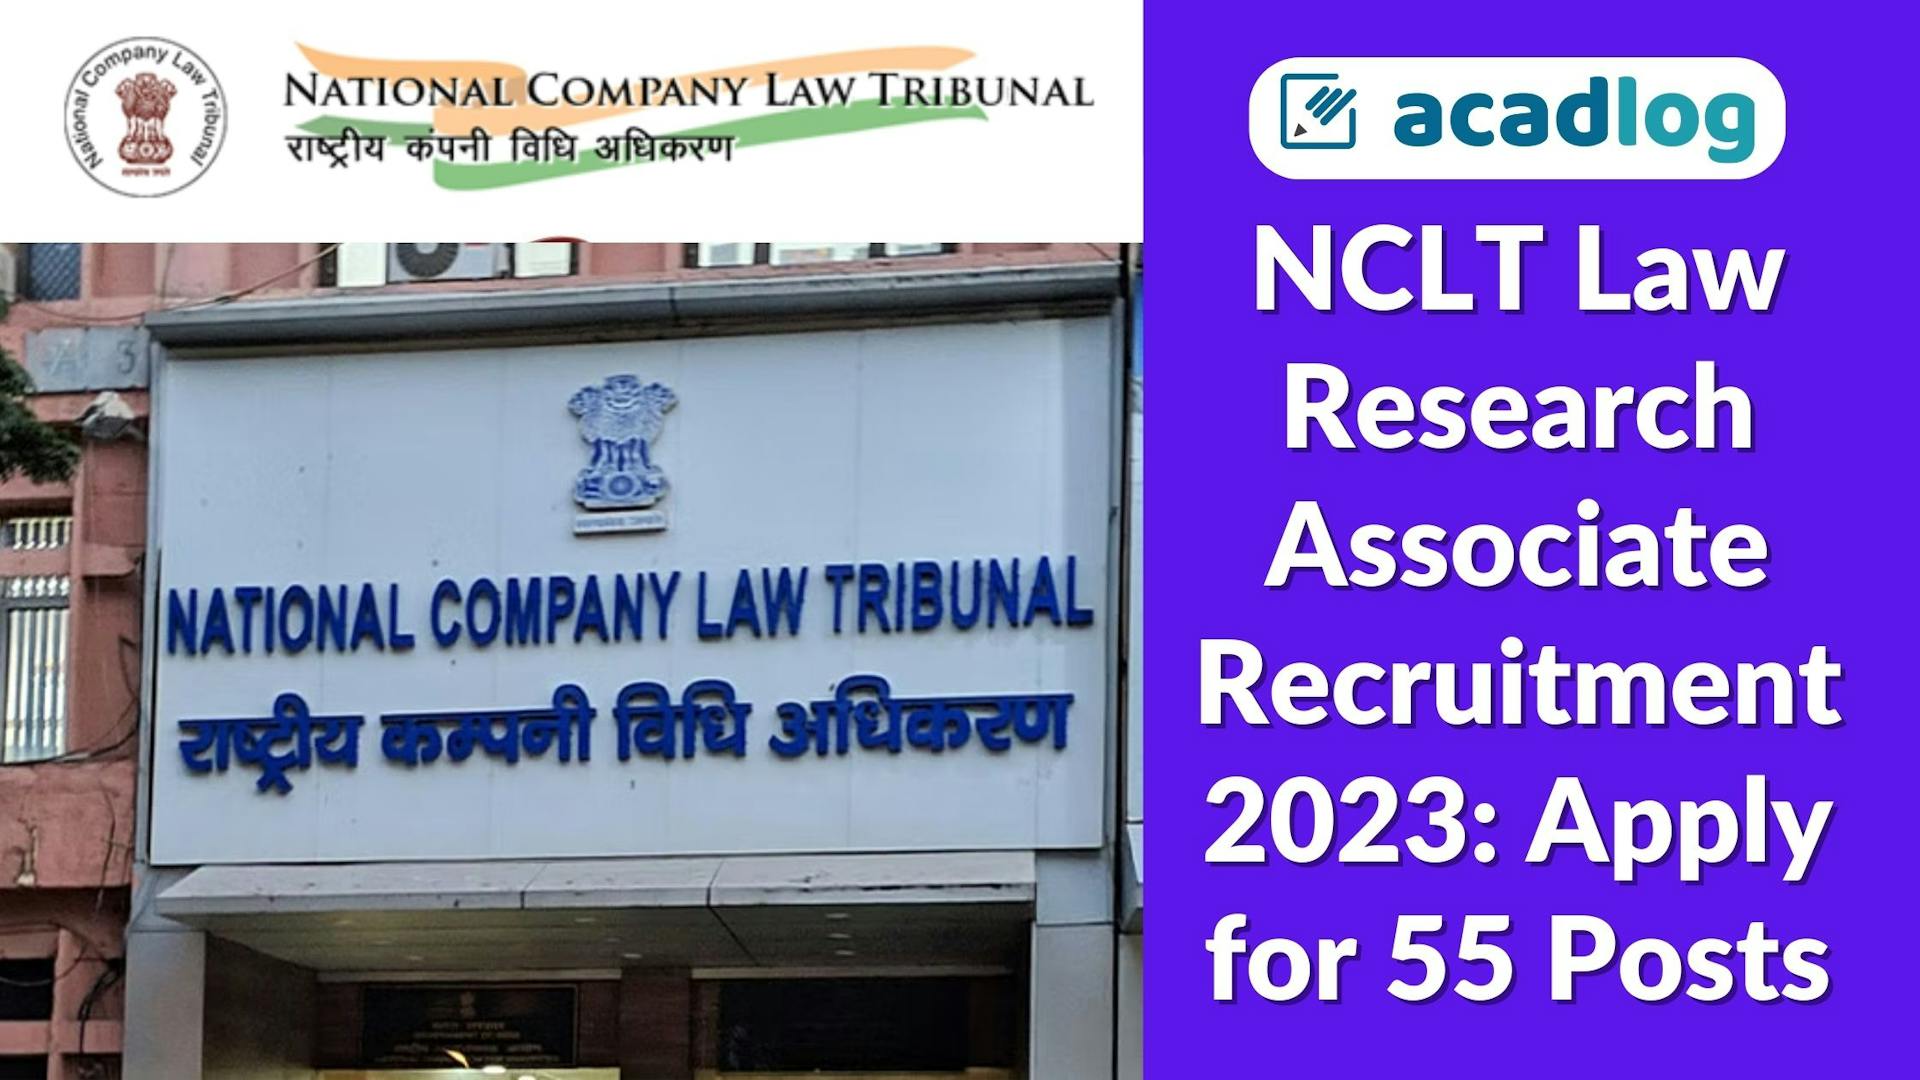 NCLT Law Research Associate Recruitment 2023: Apply for 55 Posts